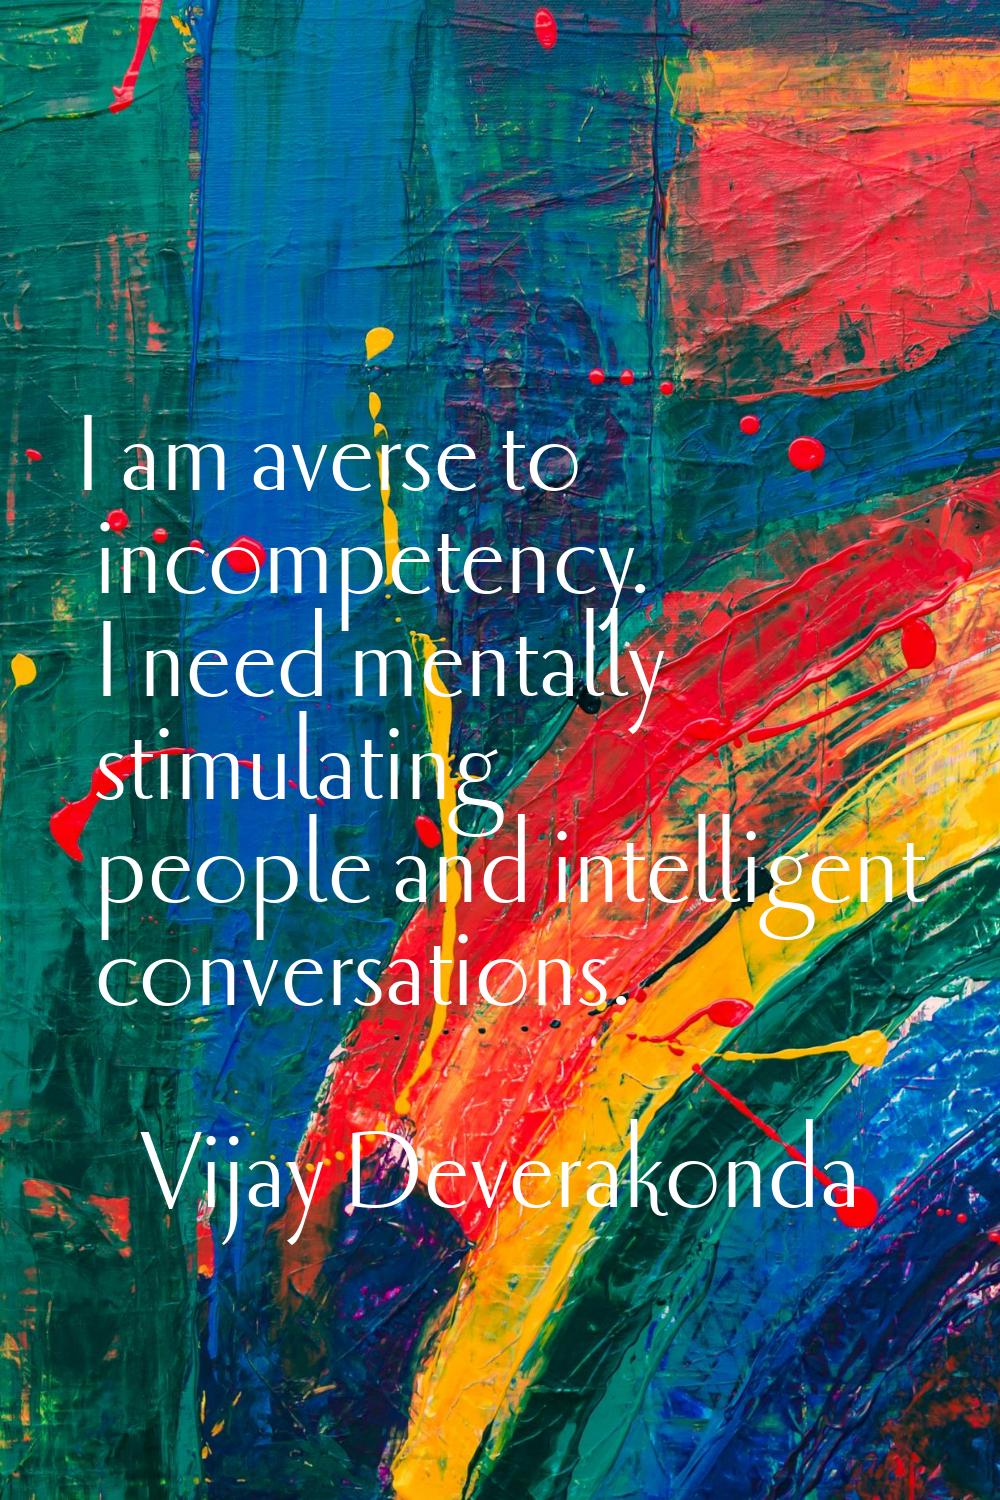 I am averse to incompetency. I need mentally stimulating people and intelligent conversations.